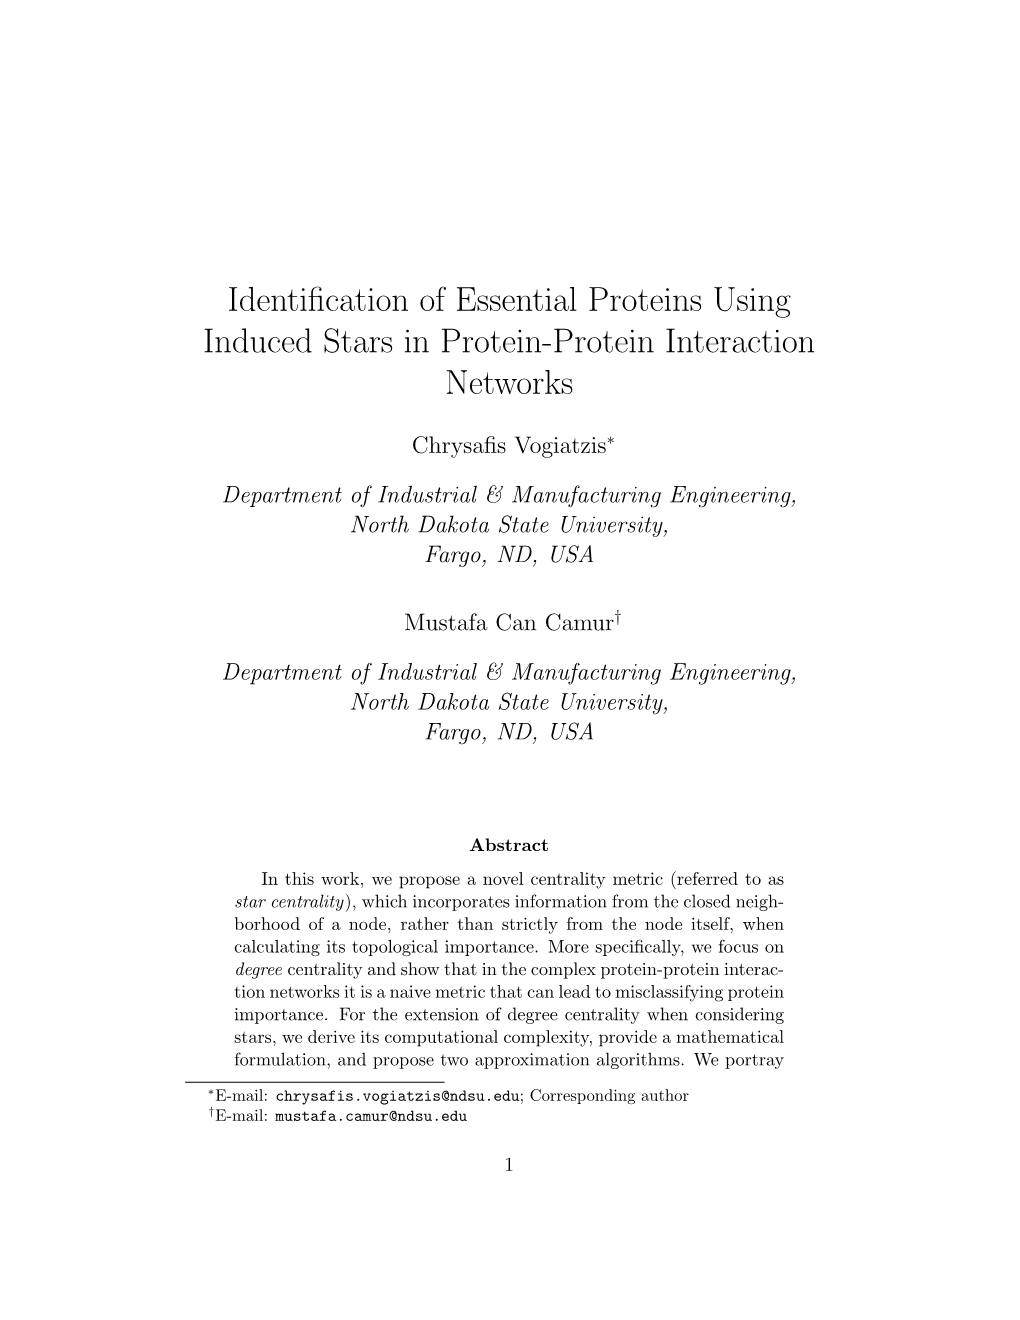 Identification of Essential Proteins Using Induced Stars in Protein